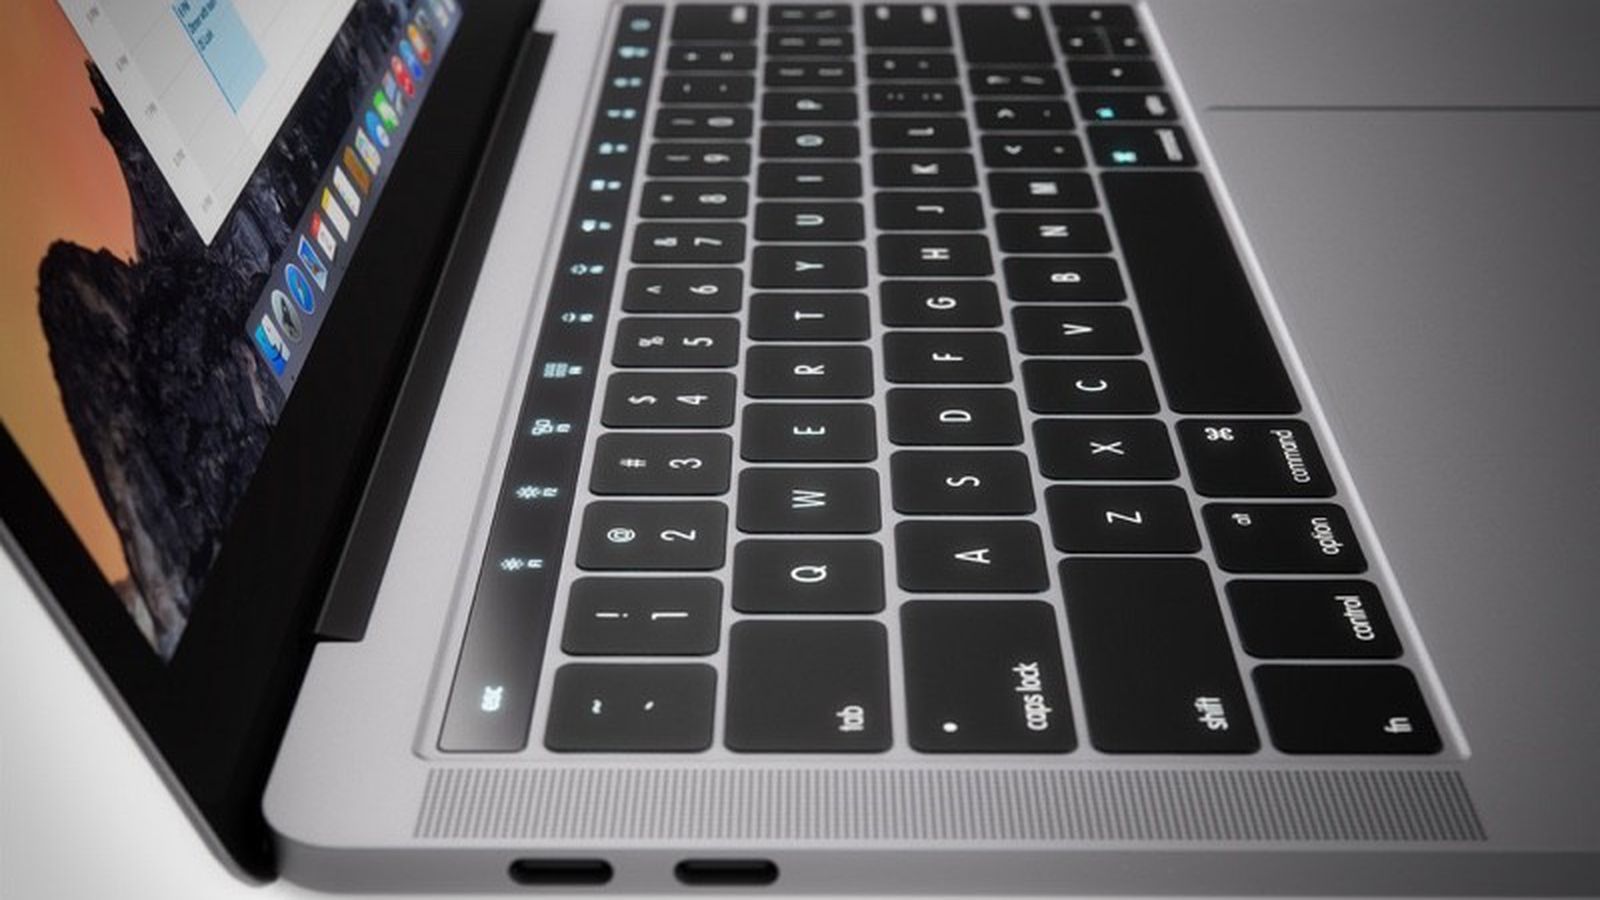 Evidence in Trademark Filing Points to MacBook OLED Panel Officially Called  'Magic Toolbar' - MacRumors